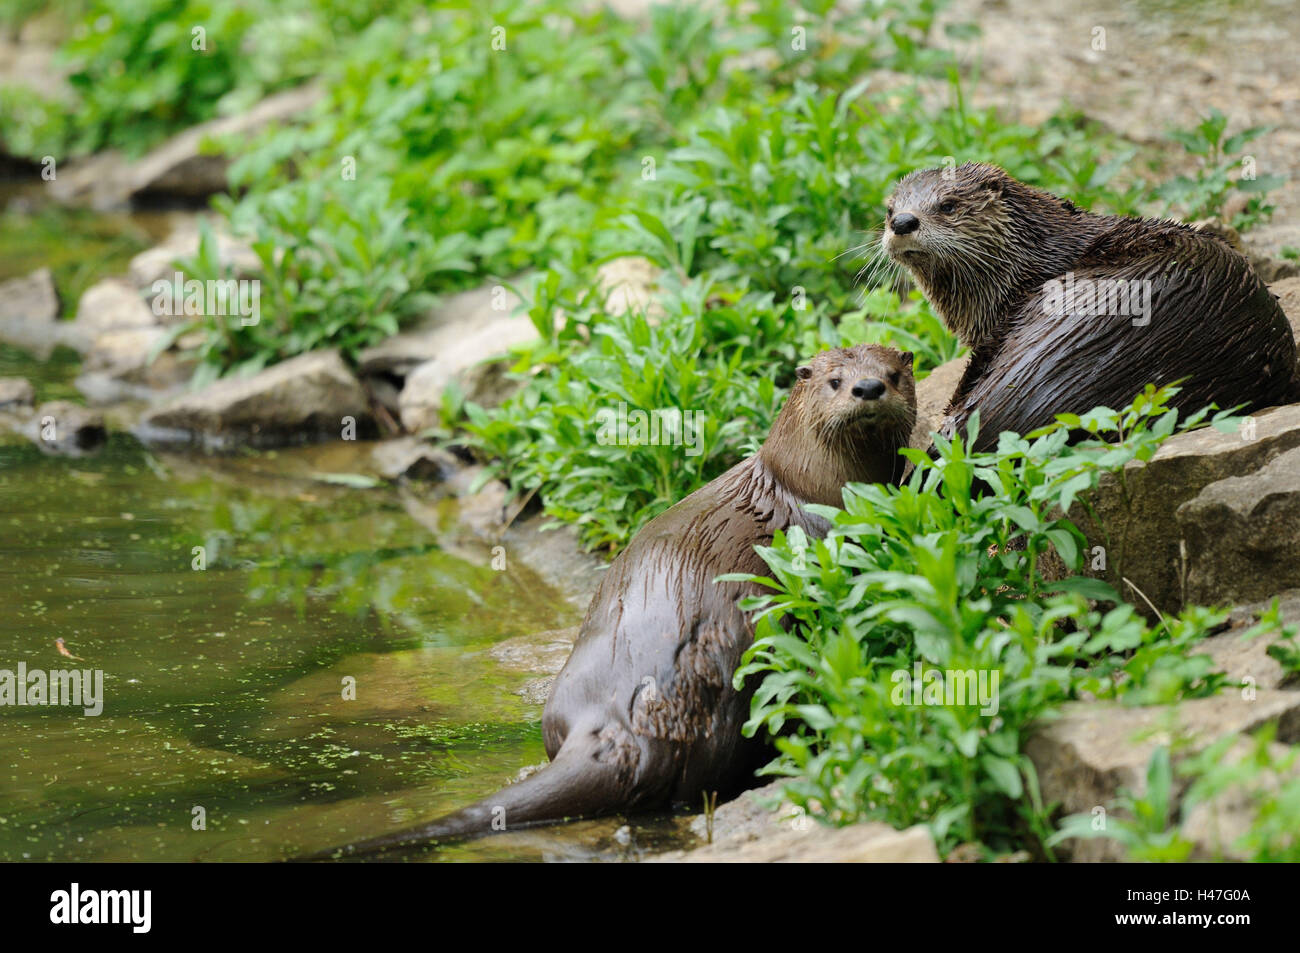 Northern river otters, Lutra canadensis, shore, side view, lying, looking at camera, Stock Photo